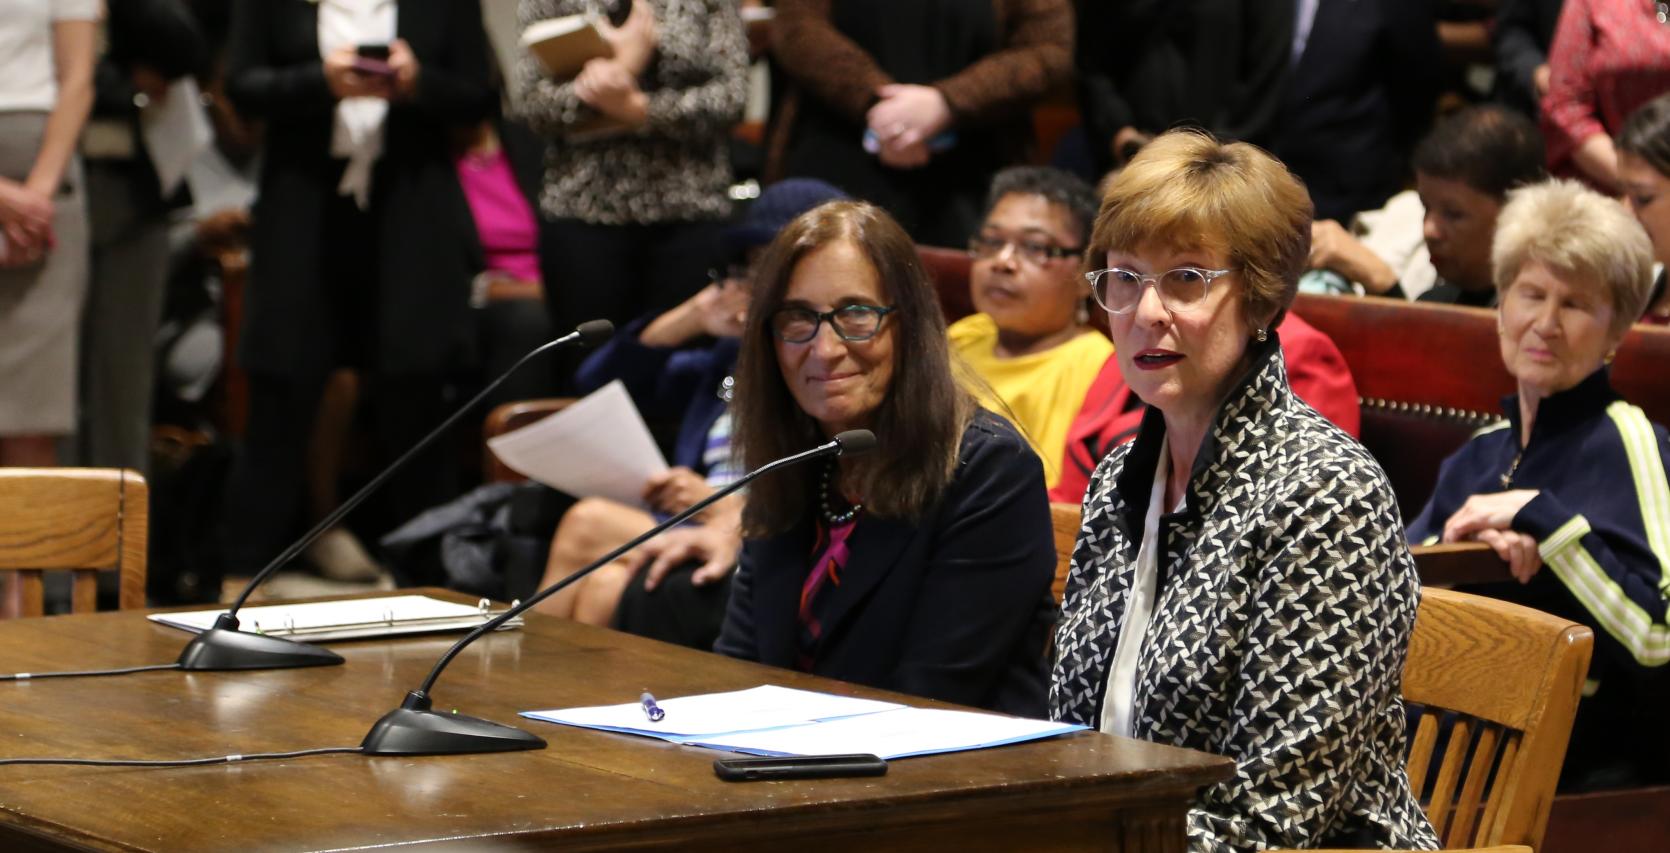 An image of Auditor Bump testifying in support of gender parity on boards and commissions. 